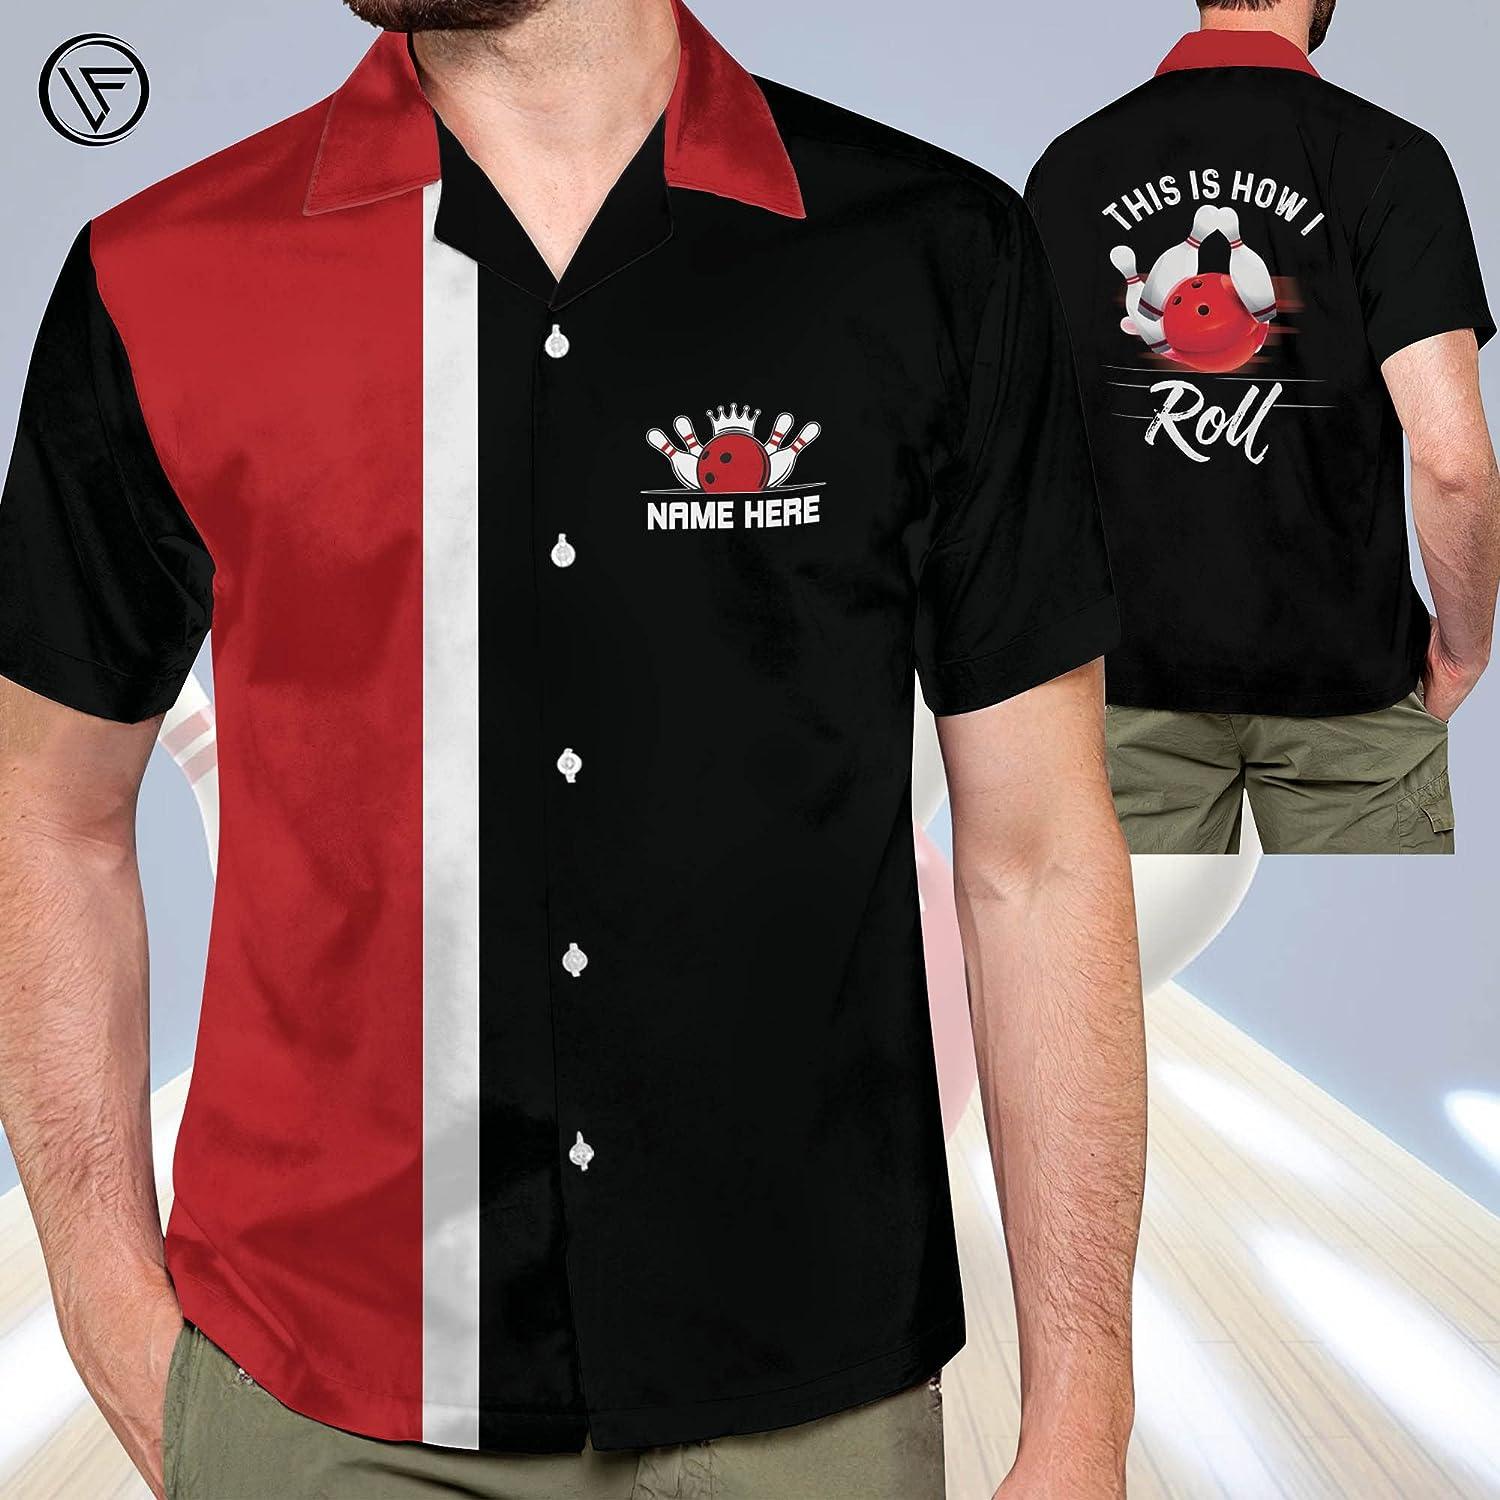 It's Not How You Bowl It's How You Roll Polo Shirt, Black And Red